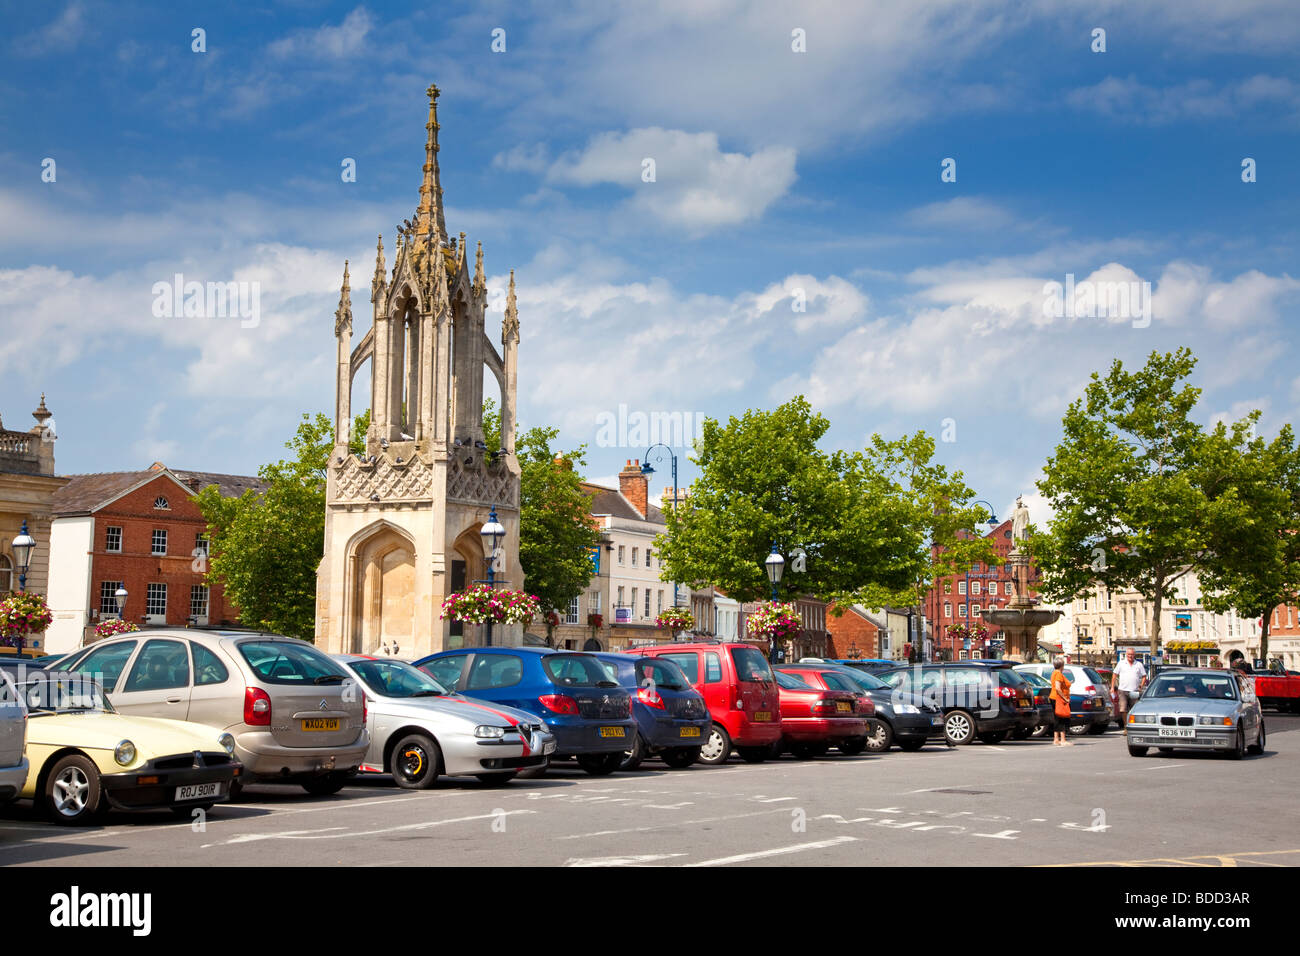 Market Cross in the Market Place at Devizes, Wiltshire, England, UK Stock Photo